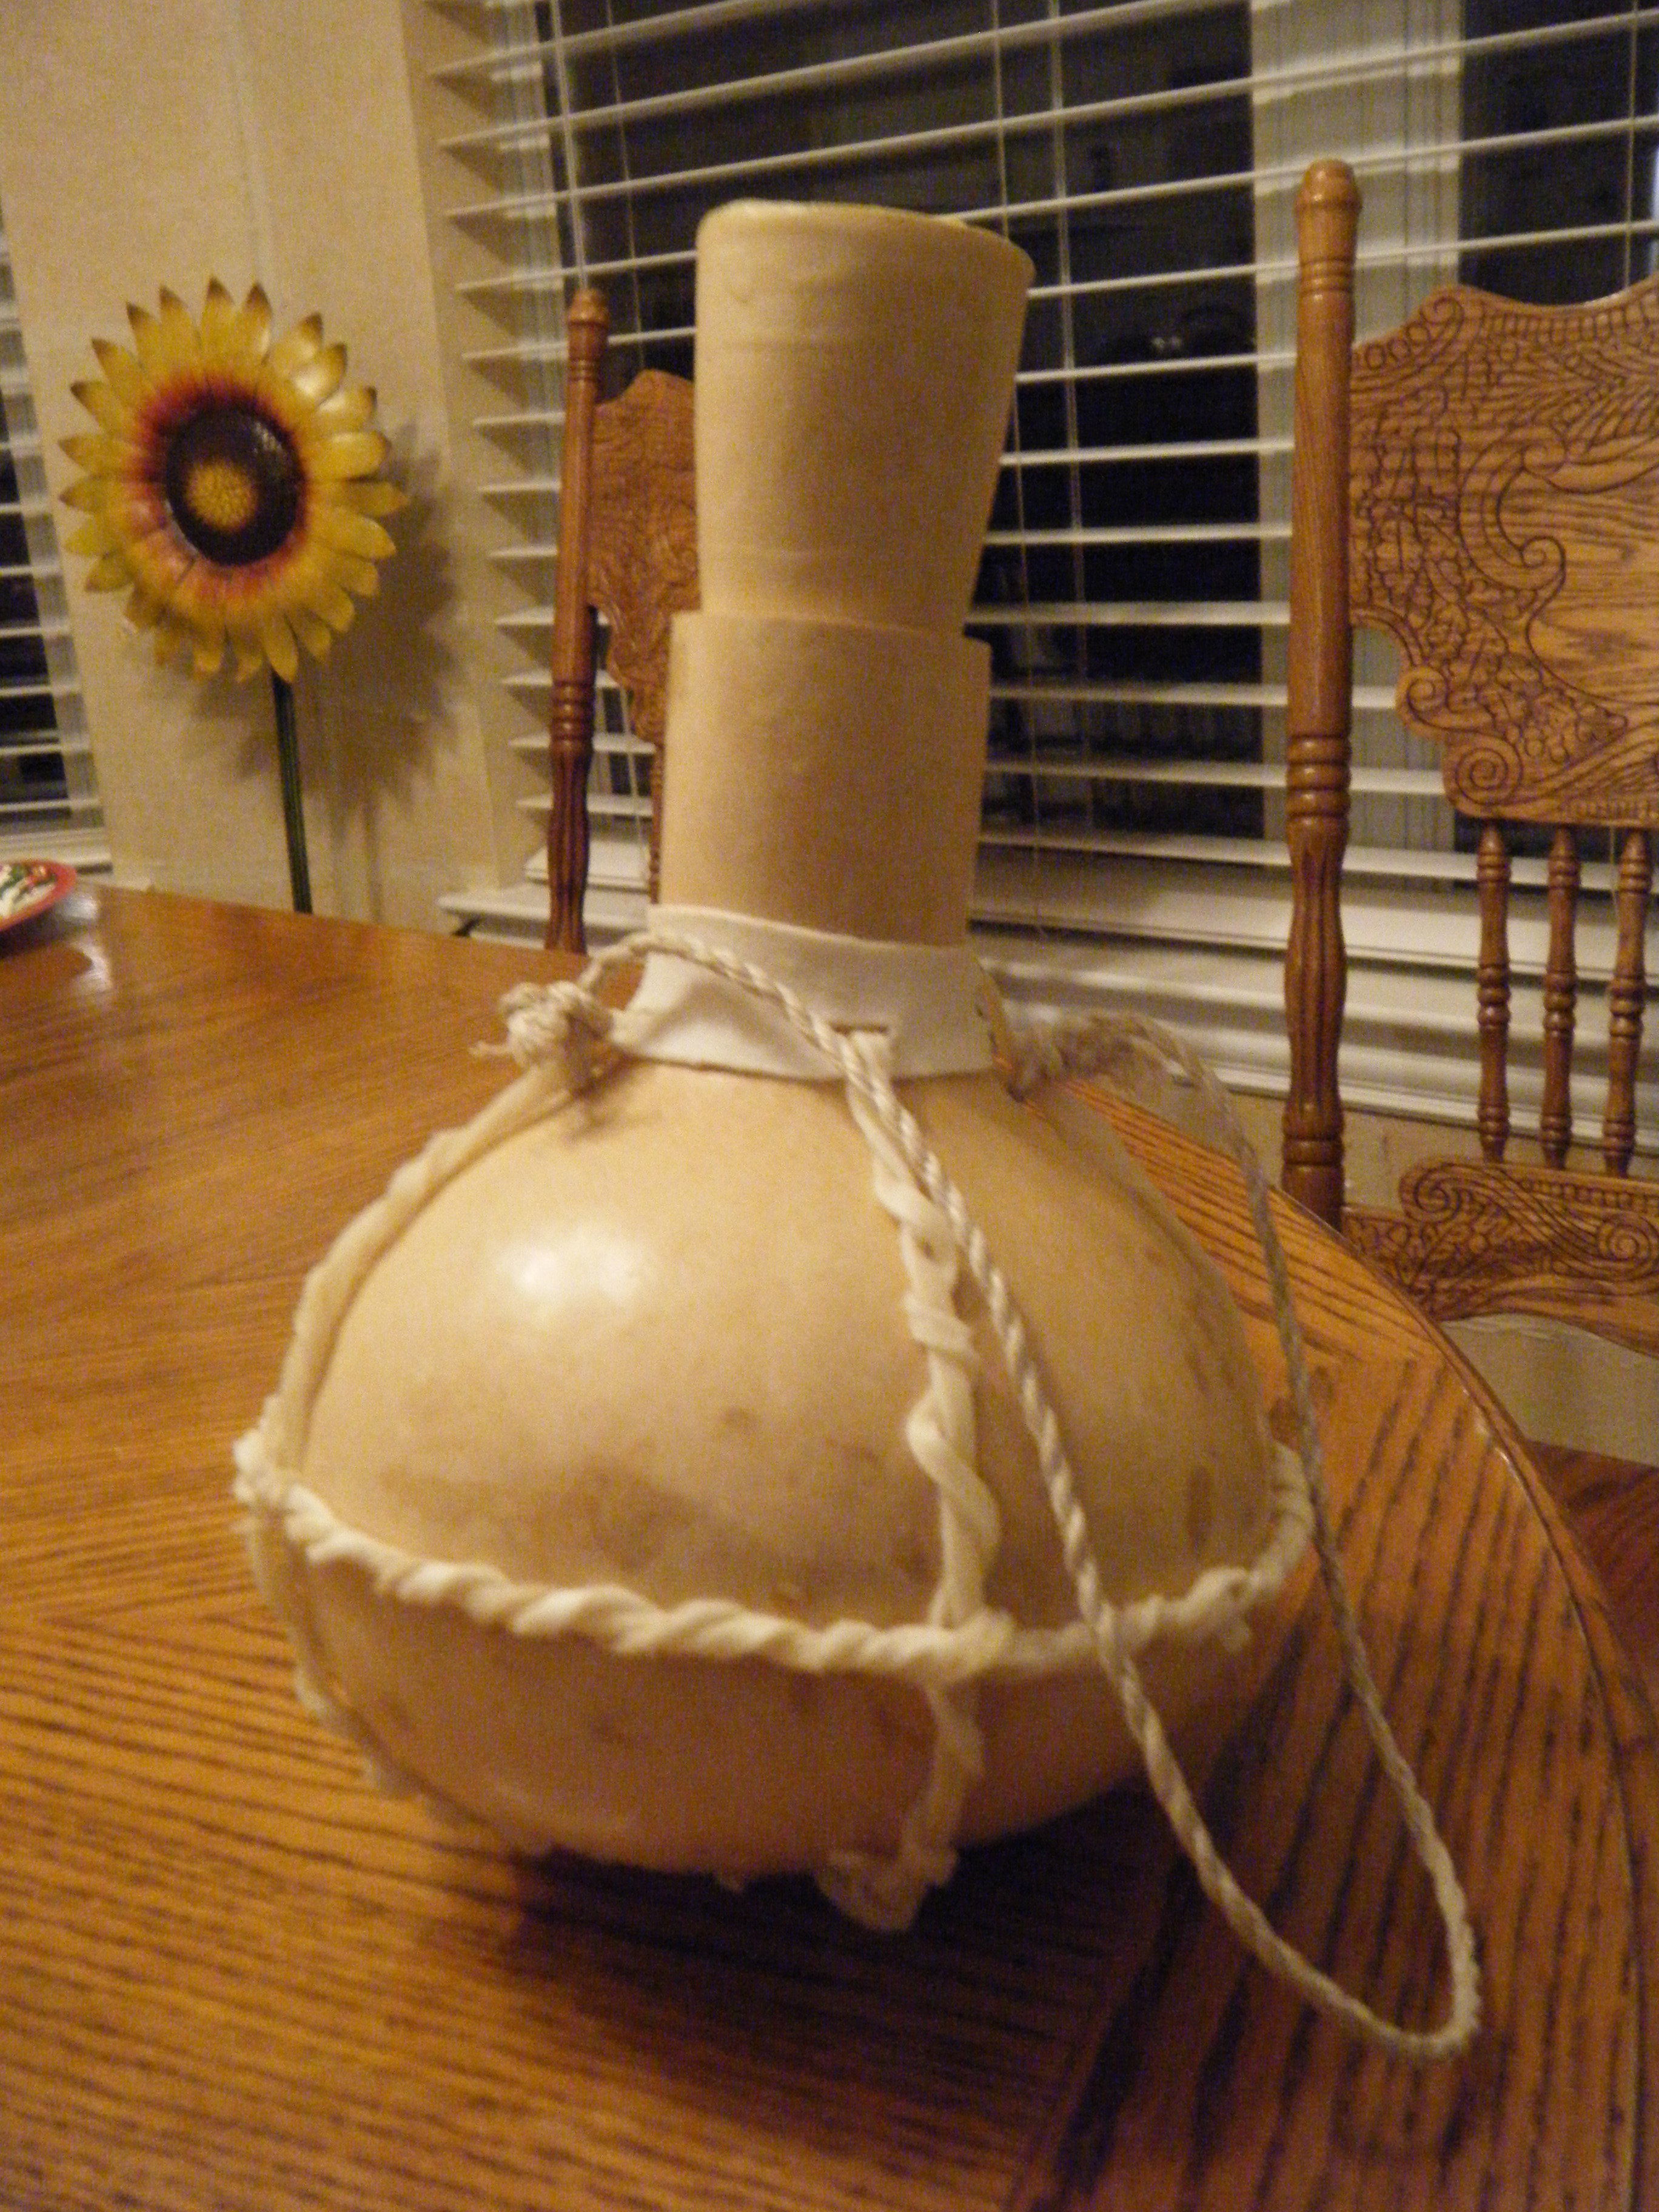 How to make a gourd water jug